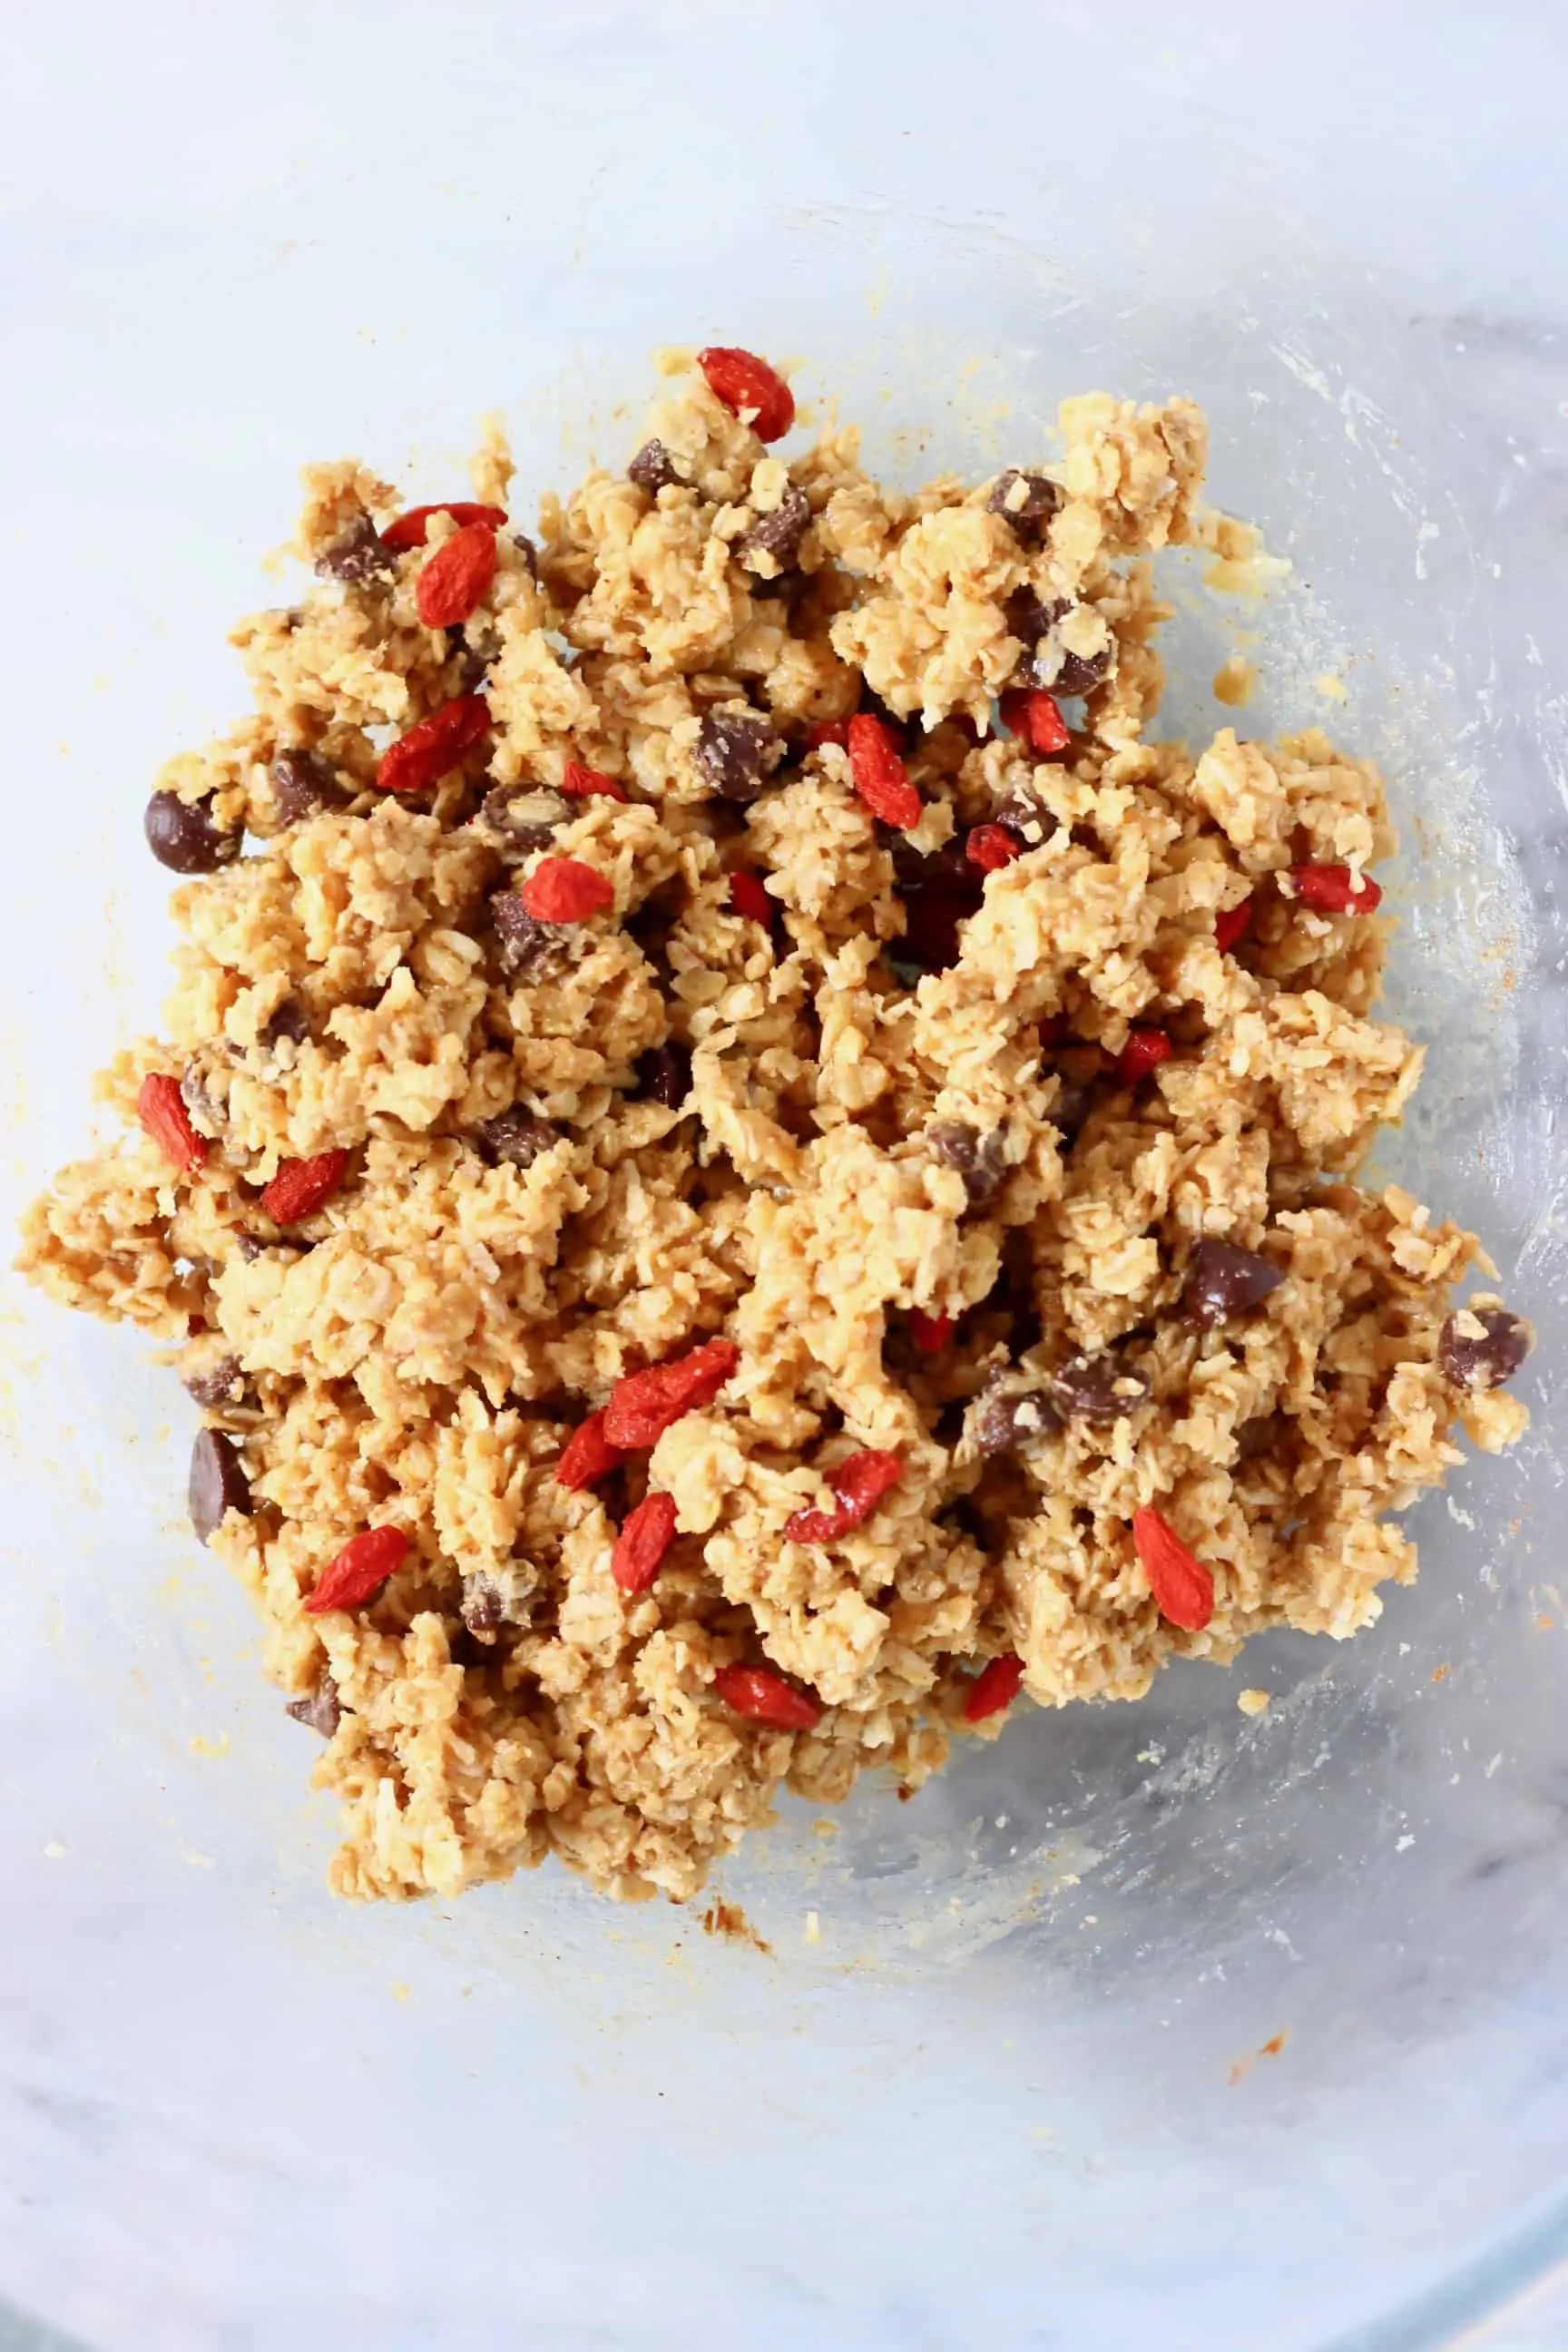 No-bake granola bar mixture with goji berries and chocolate chips in a bowl